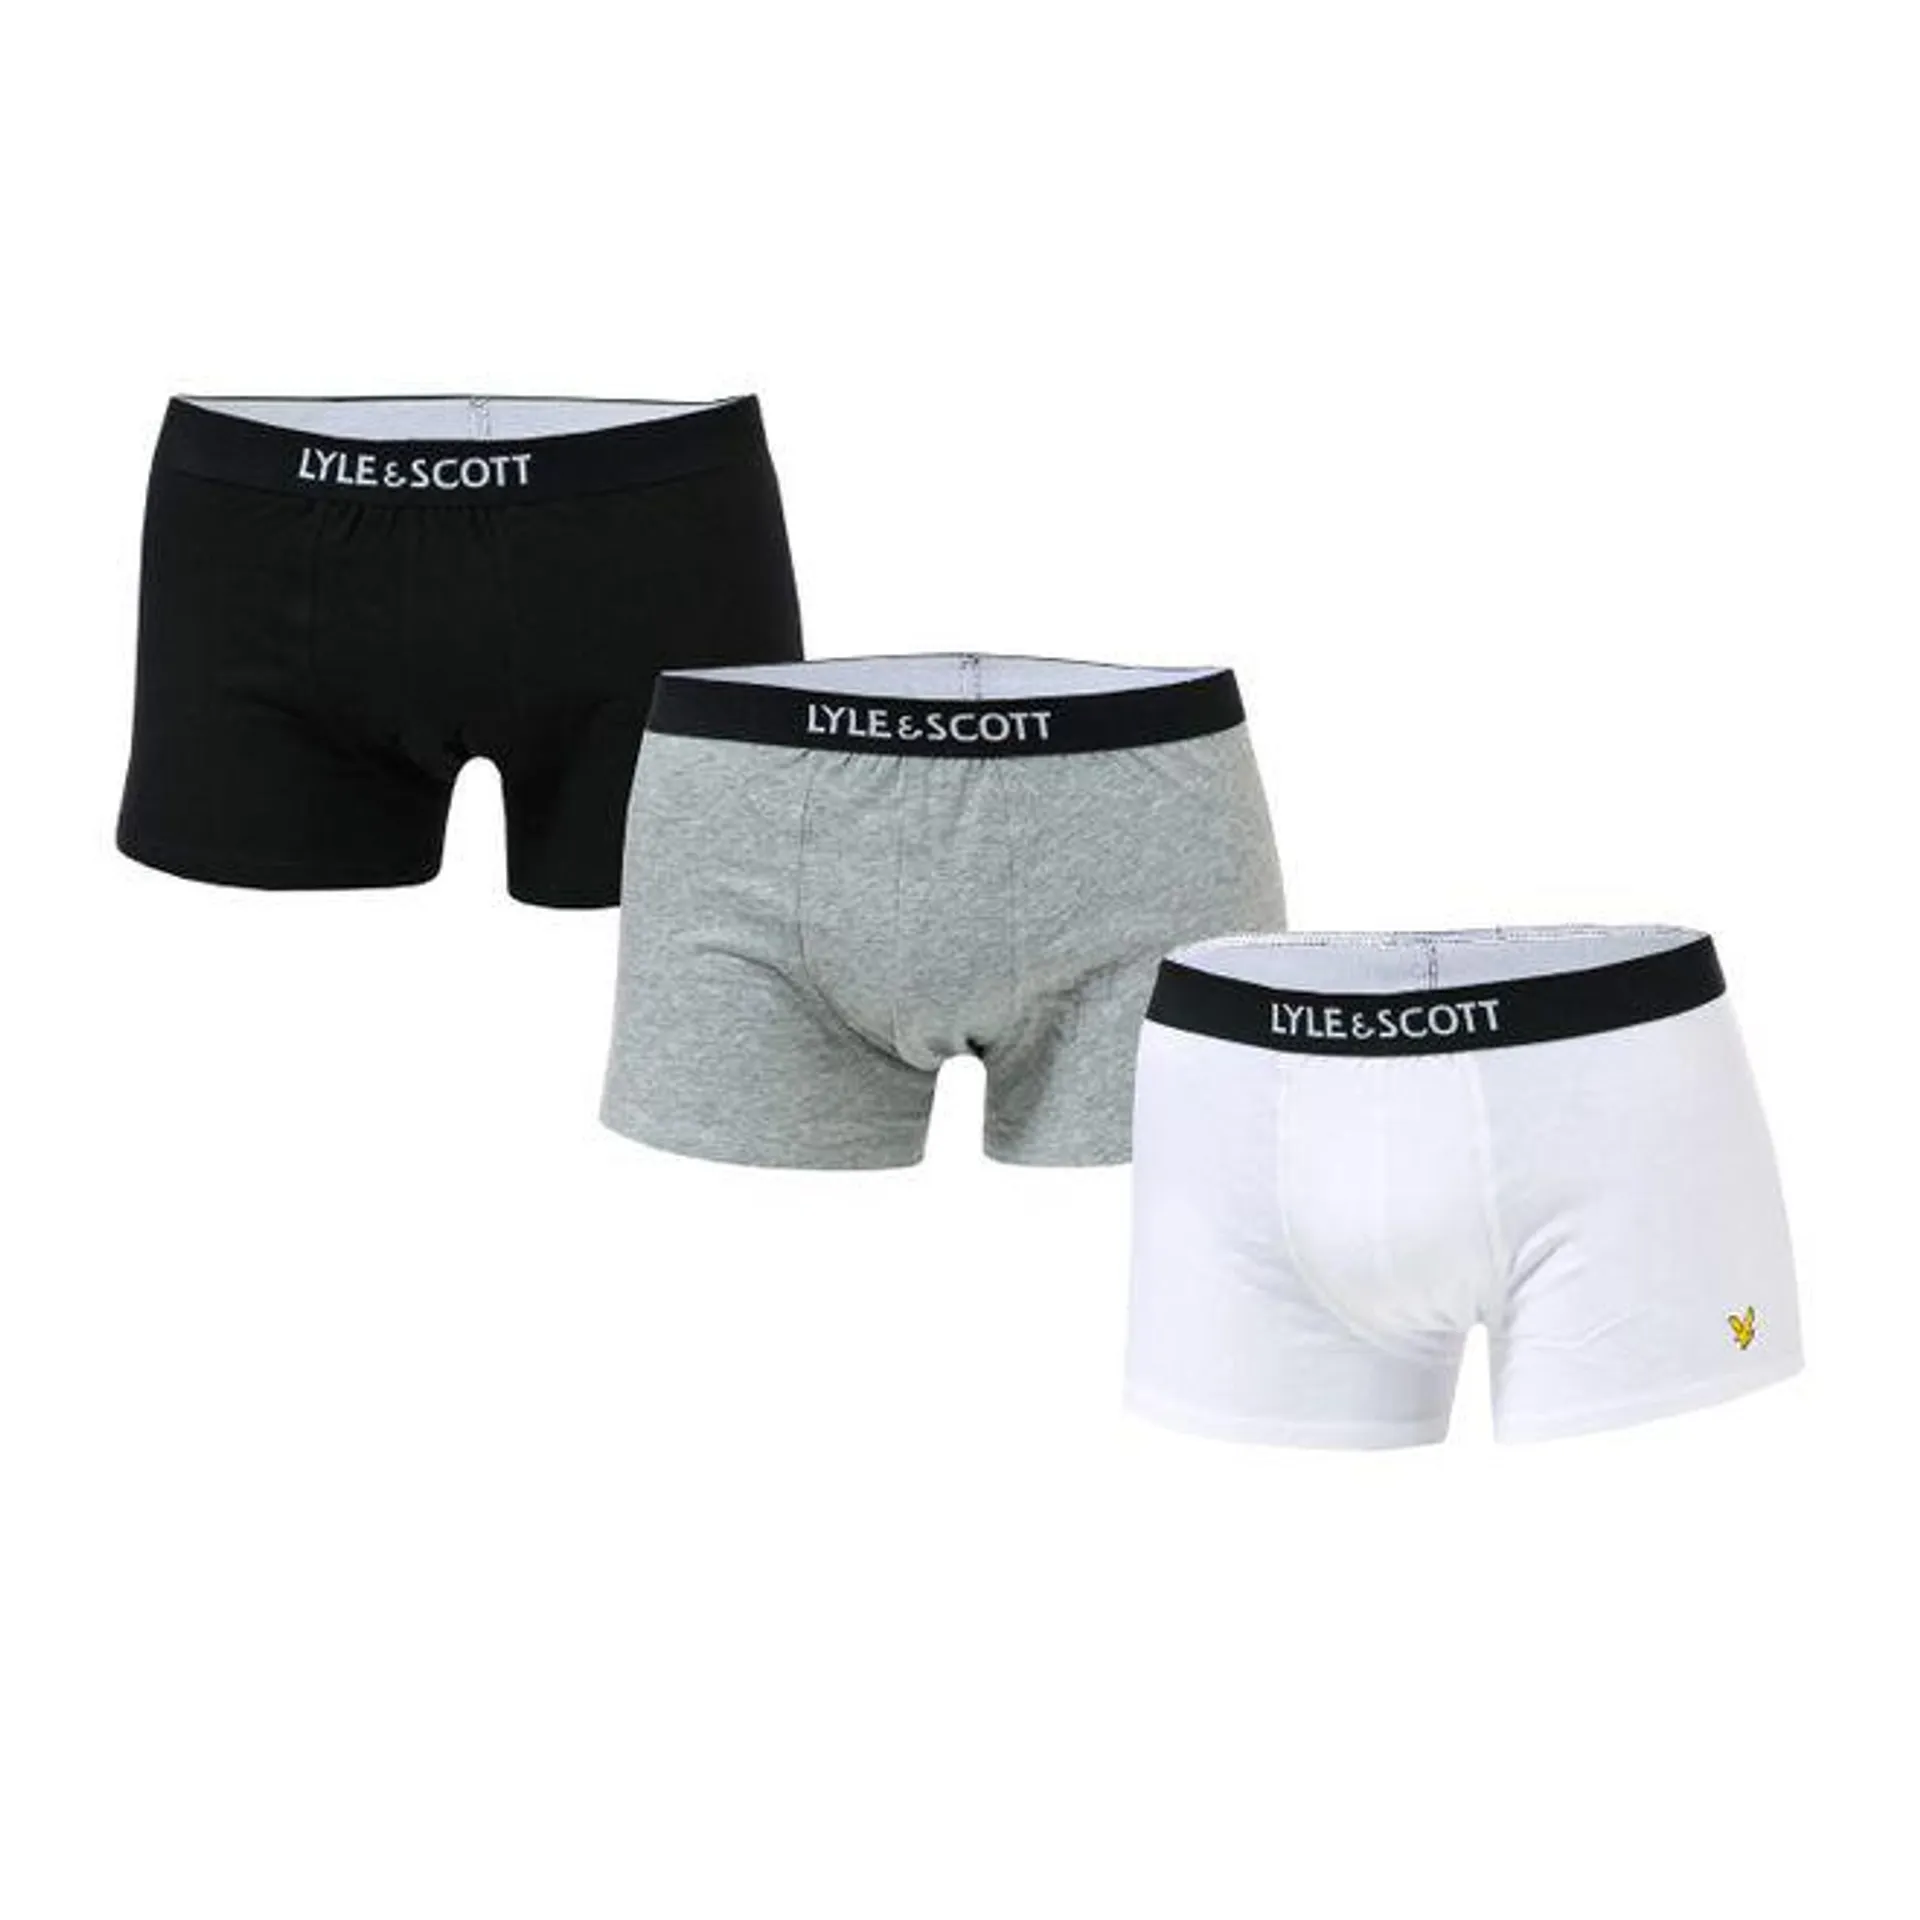 Lyle And Scott Mens Nathan 3 Pack Boxer Shorts in Black Grey White